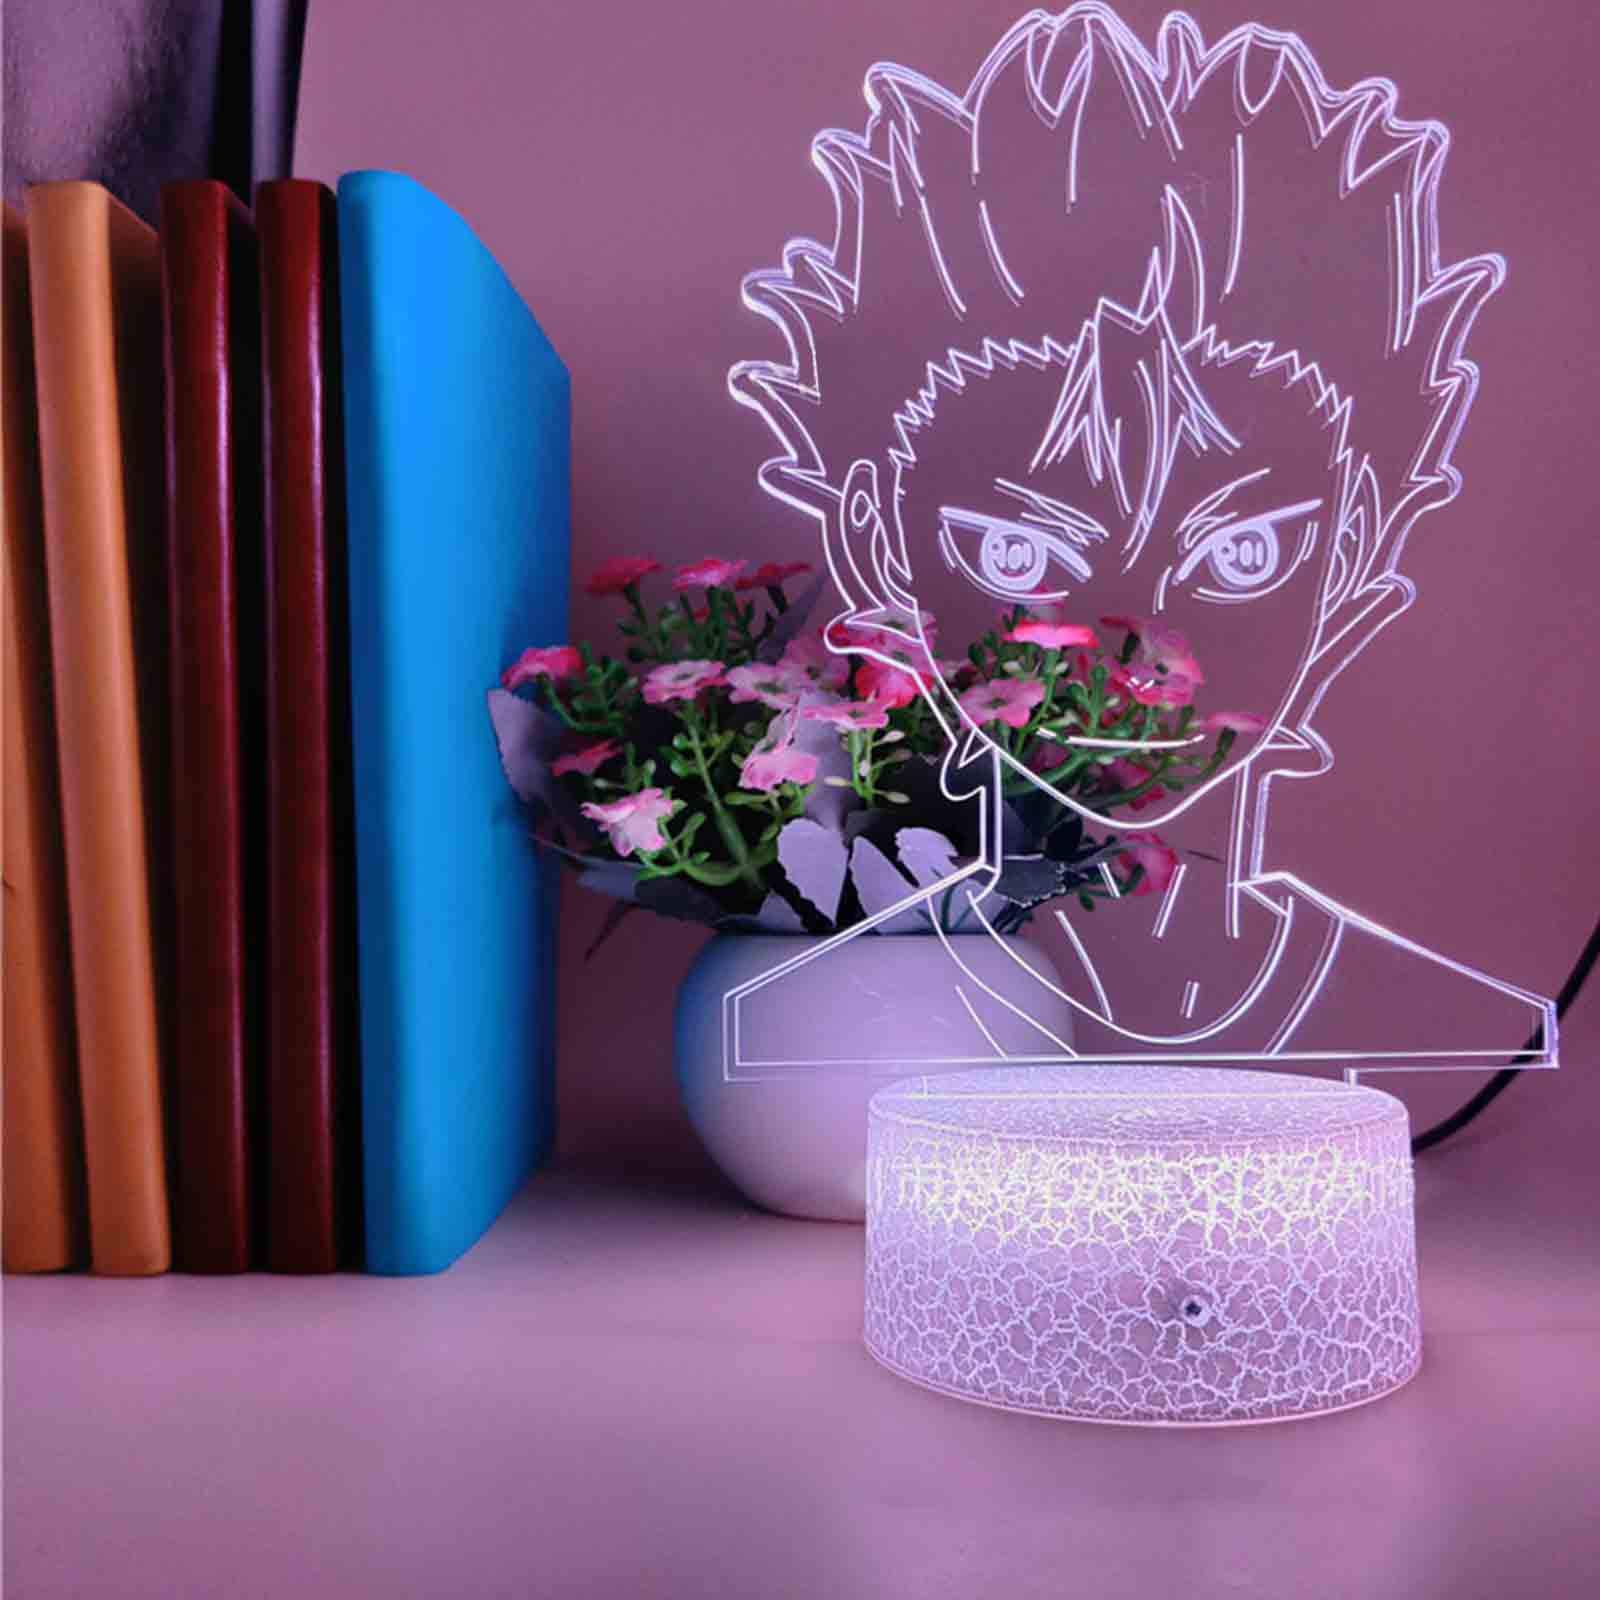 Haikyuu Kids Night Light 3D Night Light Anime LED Light with Remote Control, 7 Color Changing Christmas Halloween Birthday Gift for Child Baby Girl